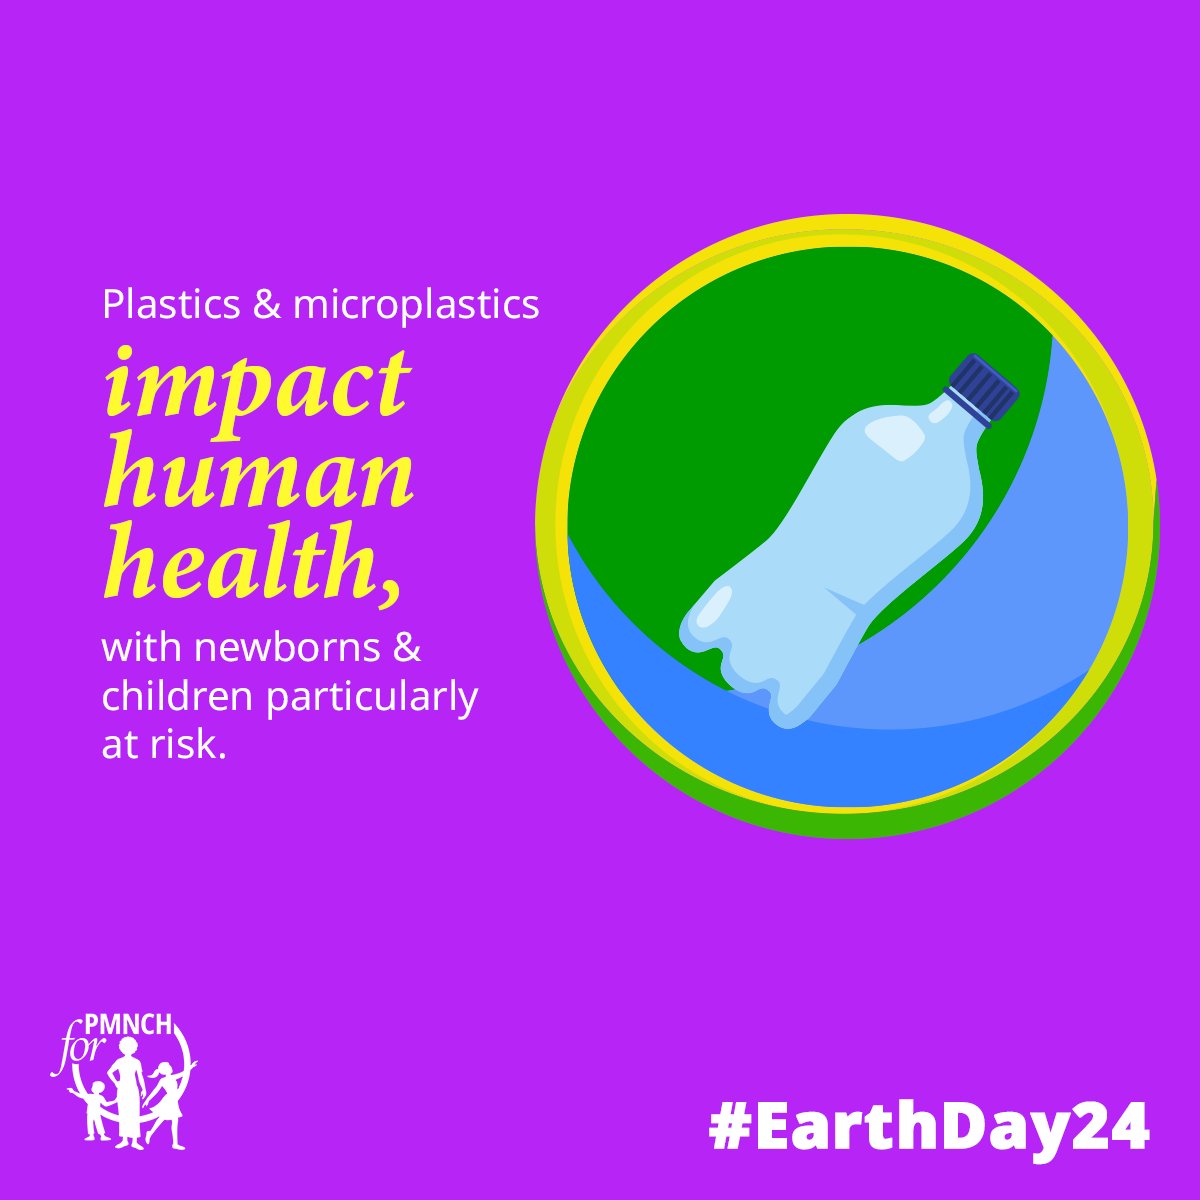 #DYK that studies have found microplastics in human placenta, linked to higher miscarriage & infertility? Let's work together to protect our planet & future generations. Get ready! 🌍 #EarthDay24 is coming up on Monday: 👇 earthday.org/wp-content/upl…